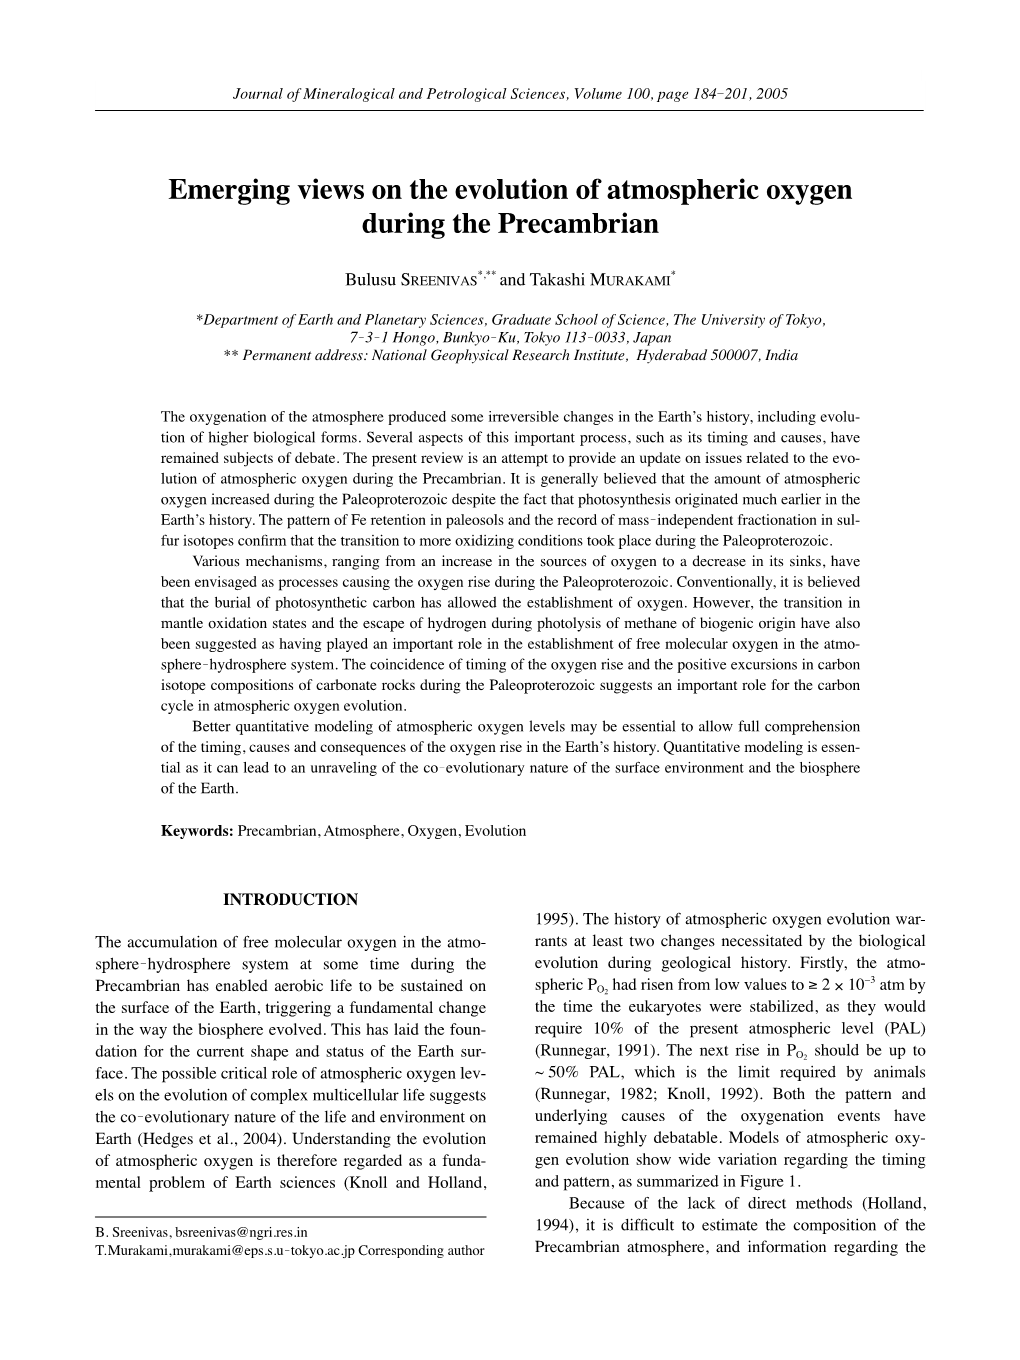 Emerging Views on the Evolution of Atmospheric Oxygen During the Precambrian 185